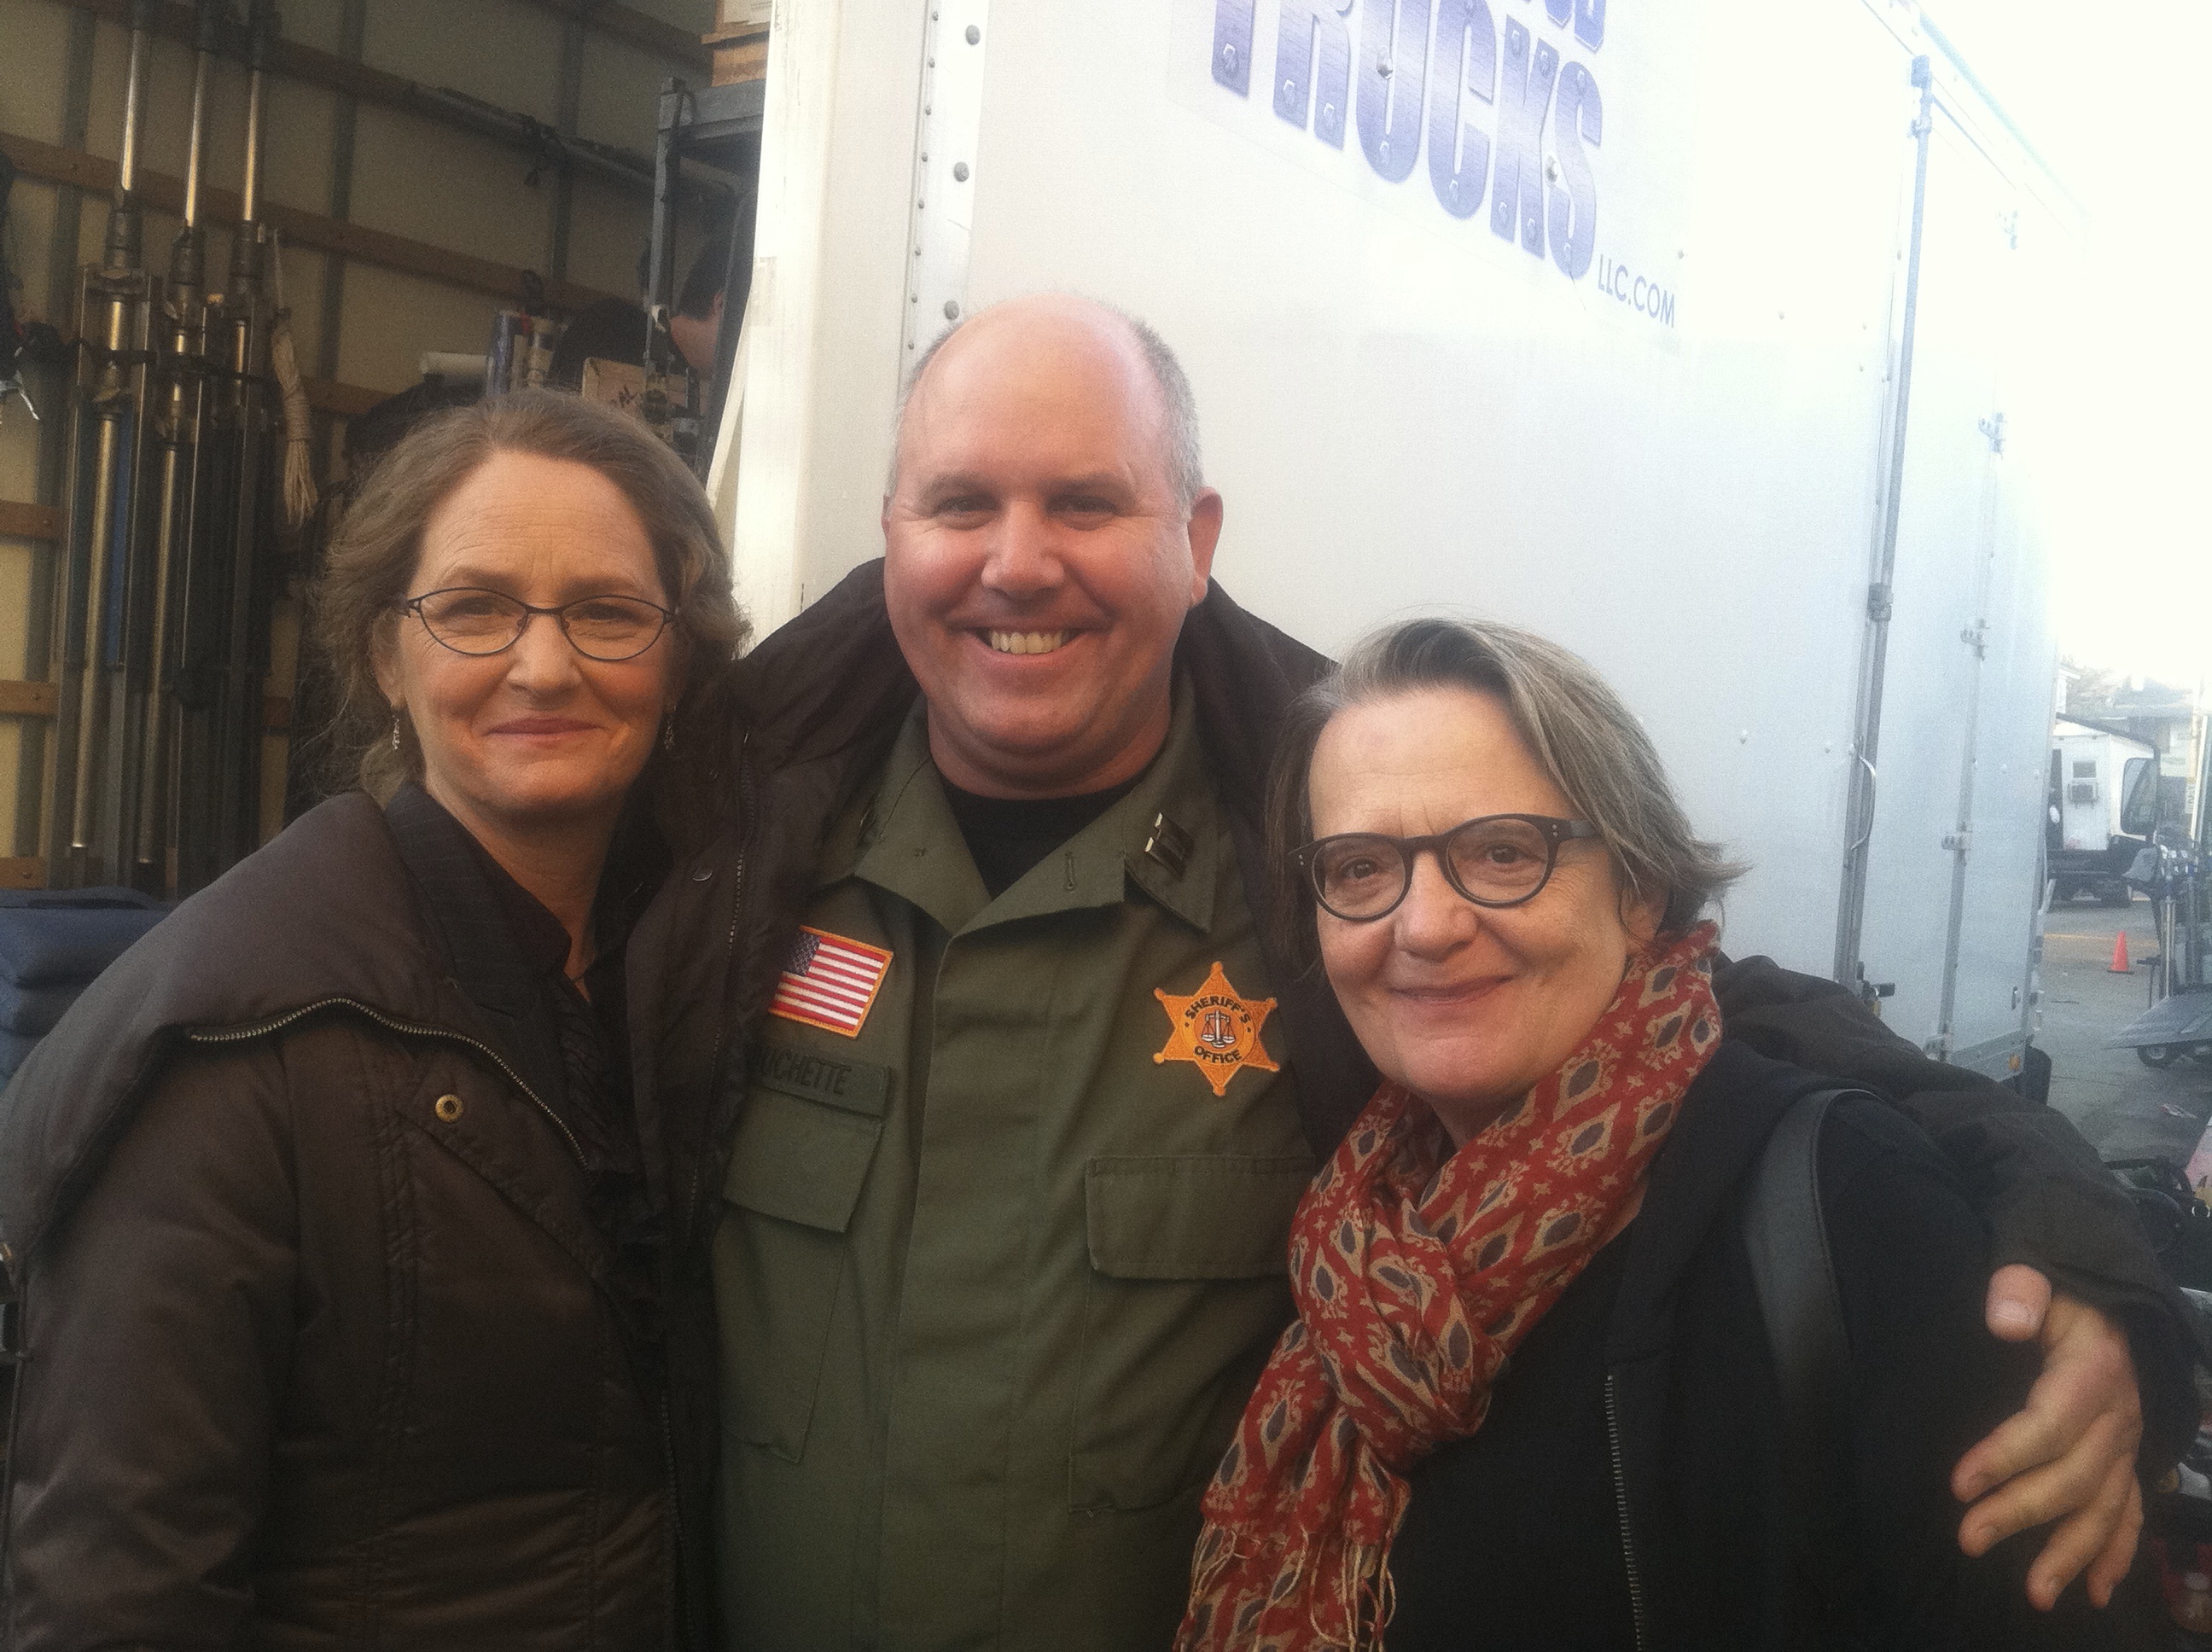 James DuMont on set of HBO's Treme with Melissa Leo and Dir. Agnieszka Holland